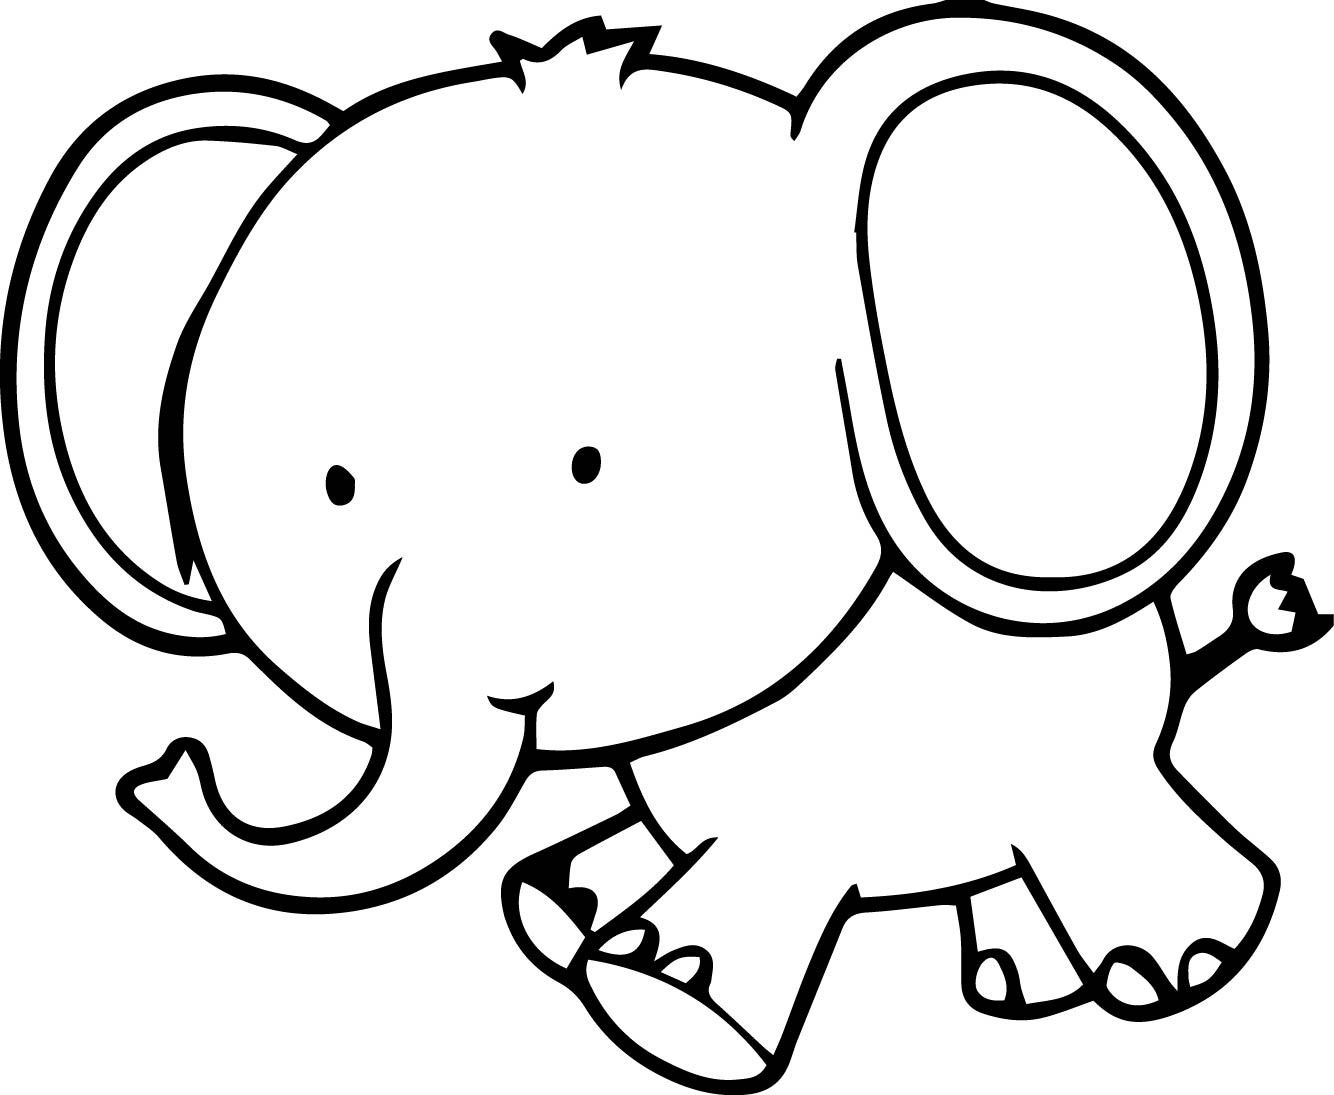 Cute Baby Elephant Coloring Pages
 Very Cute Small Elephant Coloring Page